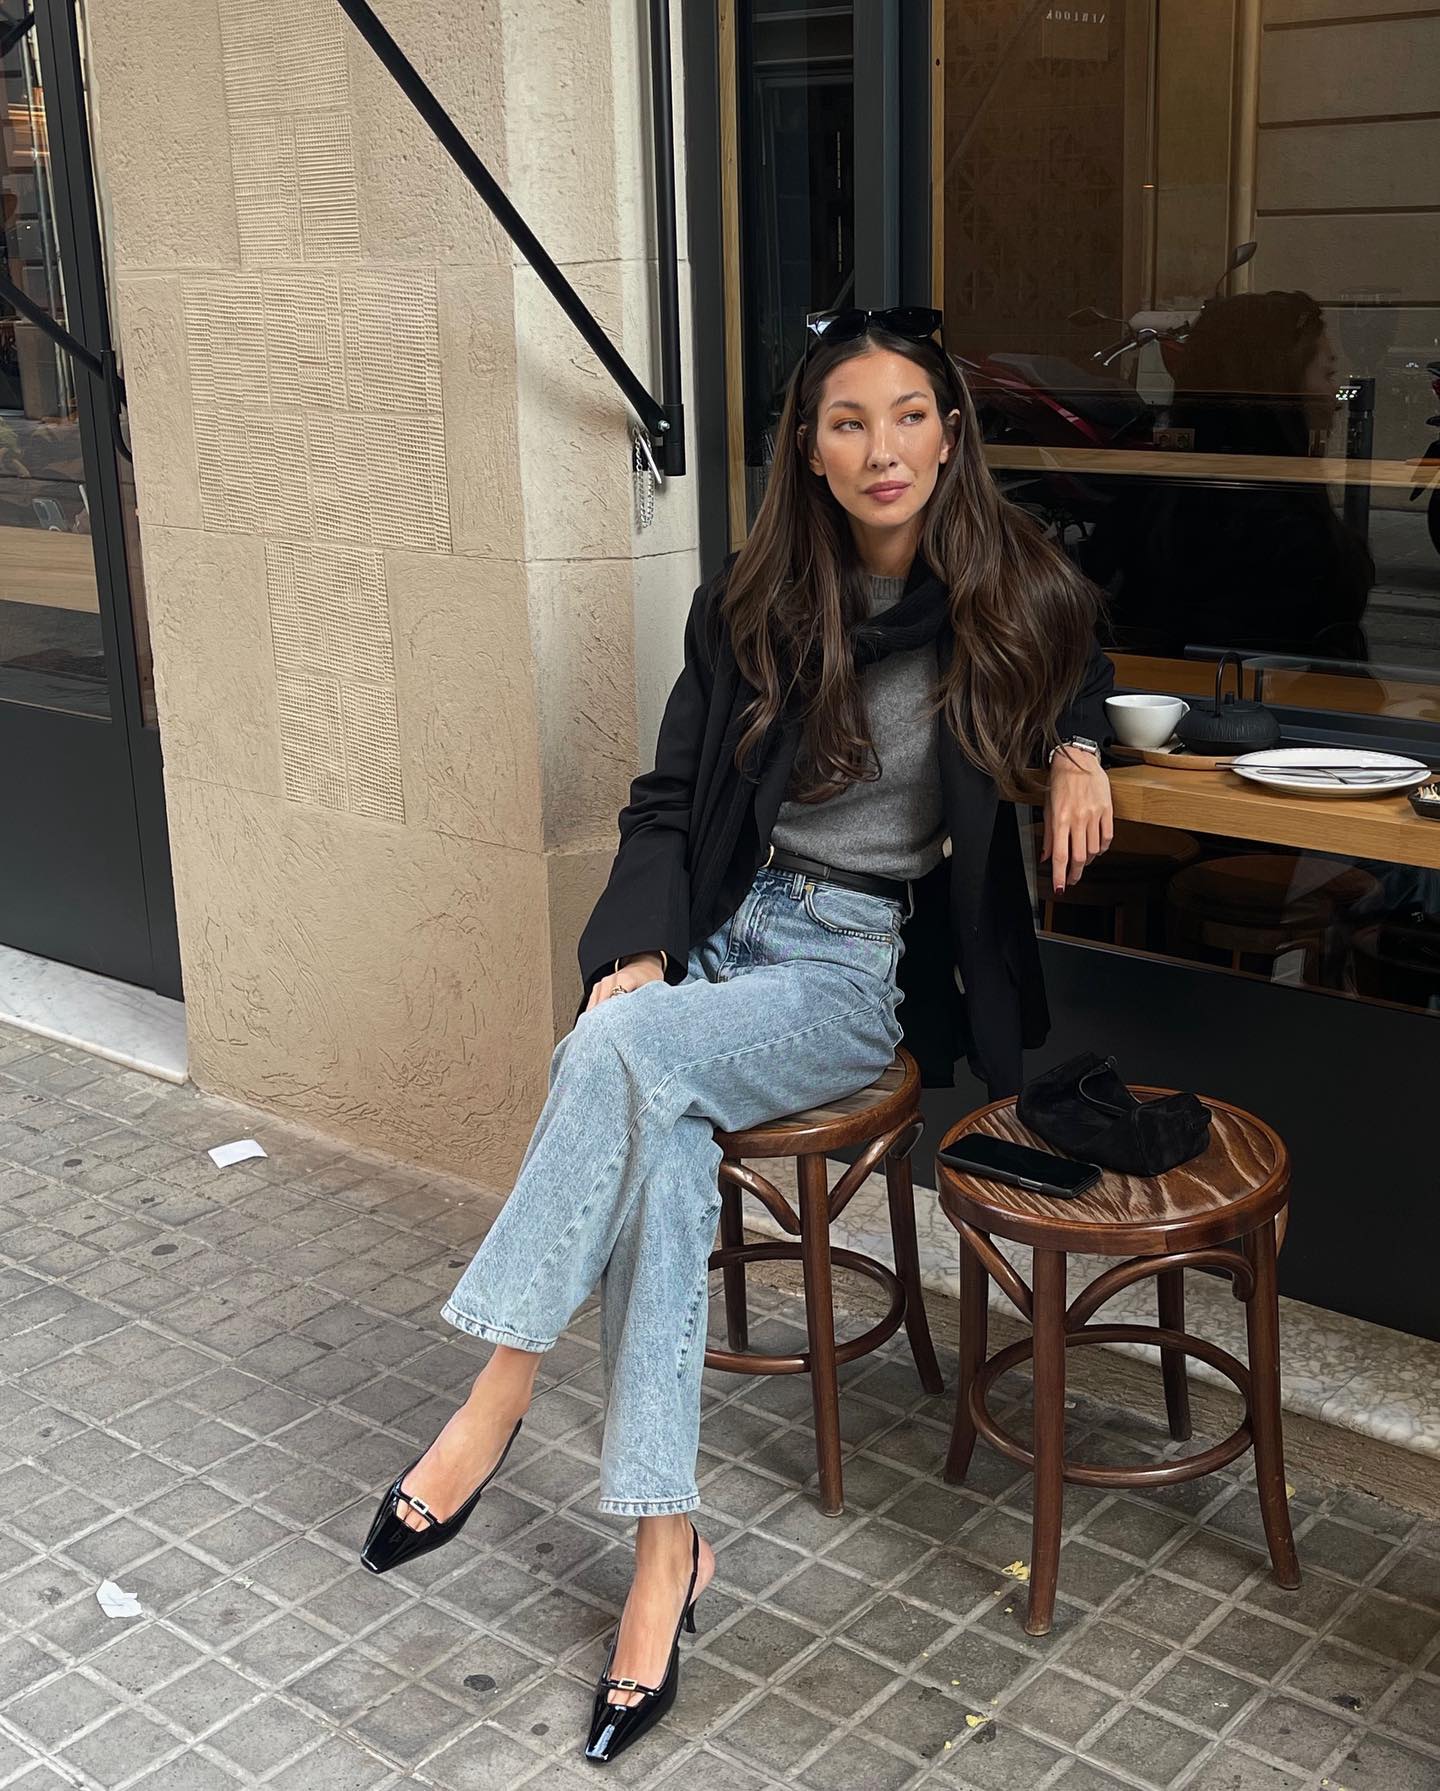 fashion influencer Felicia Akerstrom sits at a cafe in a black blazer, gray sweater, jeans, and black slingback heels